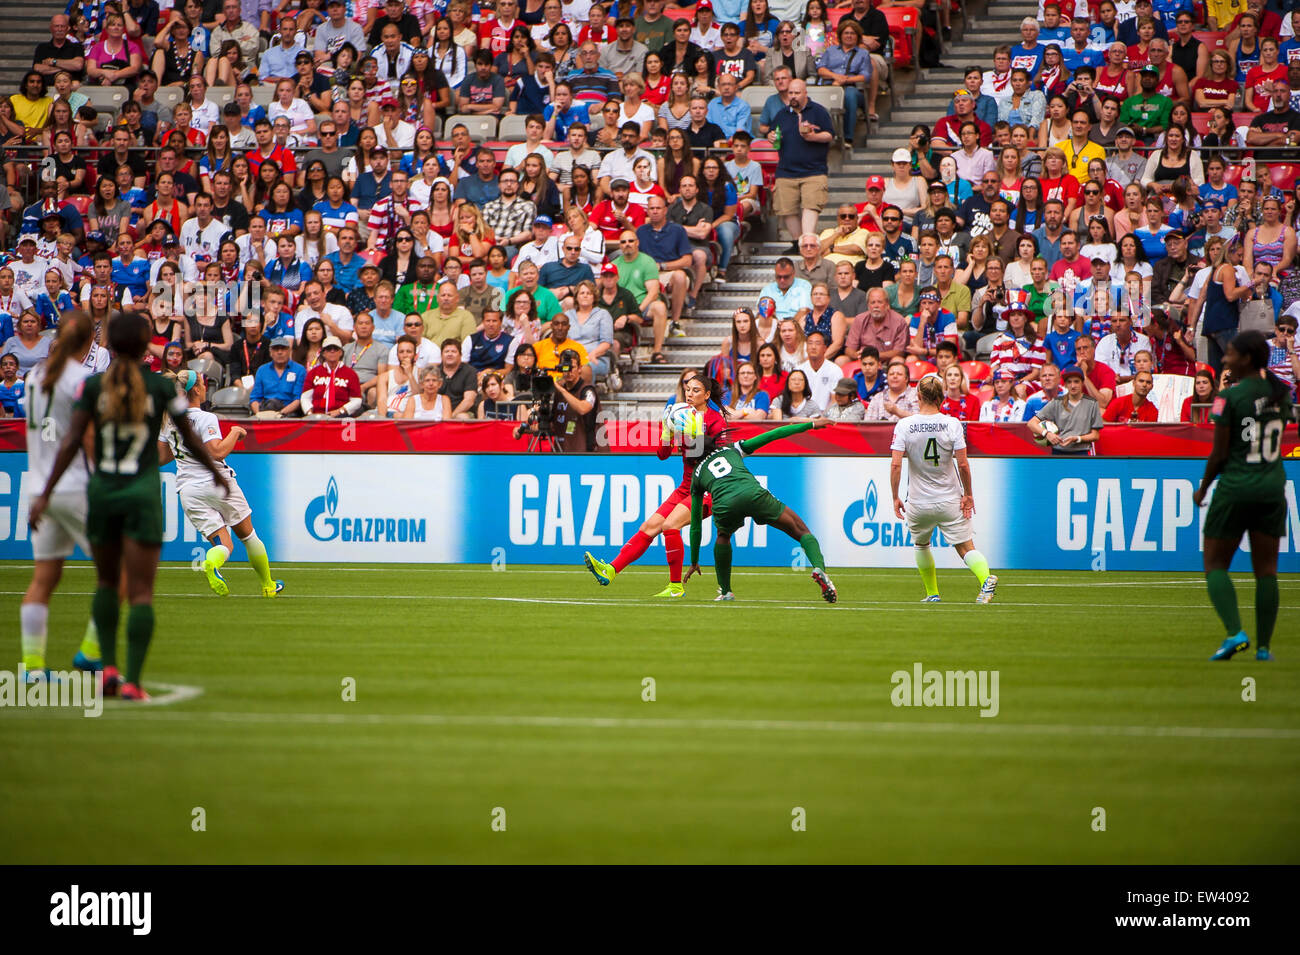 Vancouver, Canada. 16th June, 2015. United States goalkeeper Hope Solo (#1) controls the ball after a shot on goal during the opening round match between Nigeria and the United States at the FIFA Women's World Cup Canada 2015 at BC Place Stadium. The United States won the match 1-0. Credit:  Matt Jacques/Alamy Live News Stock Photo